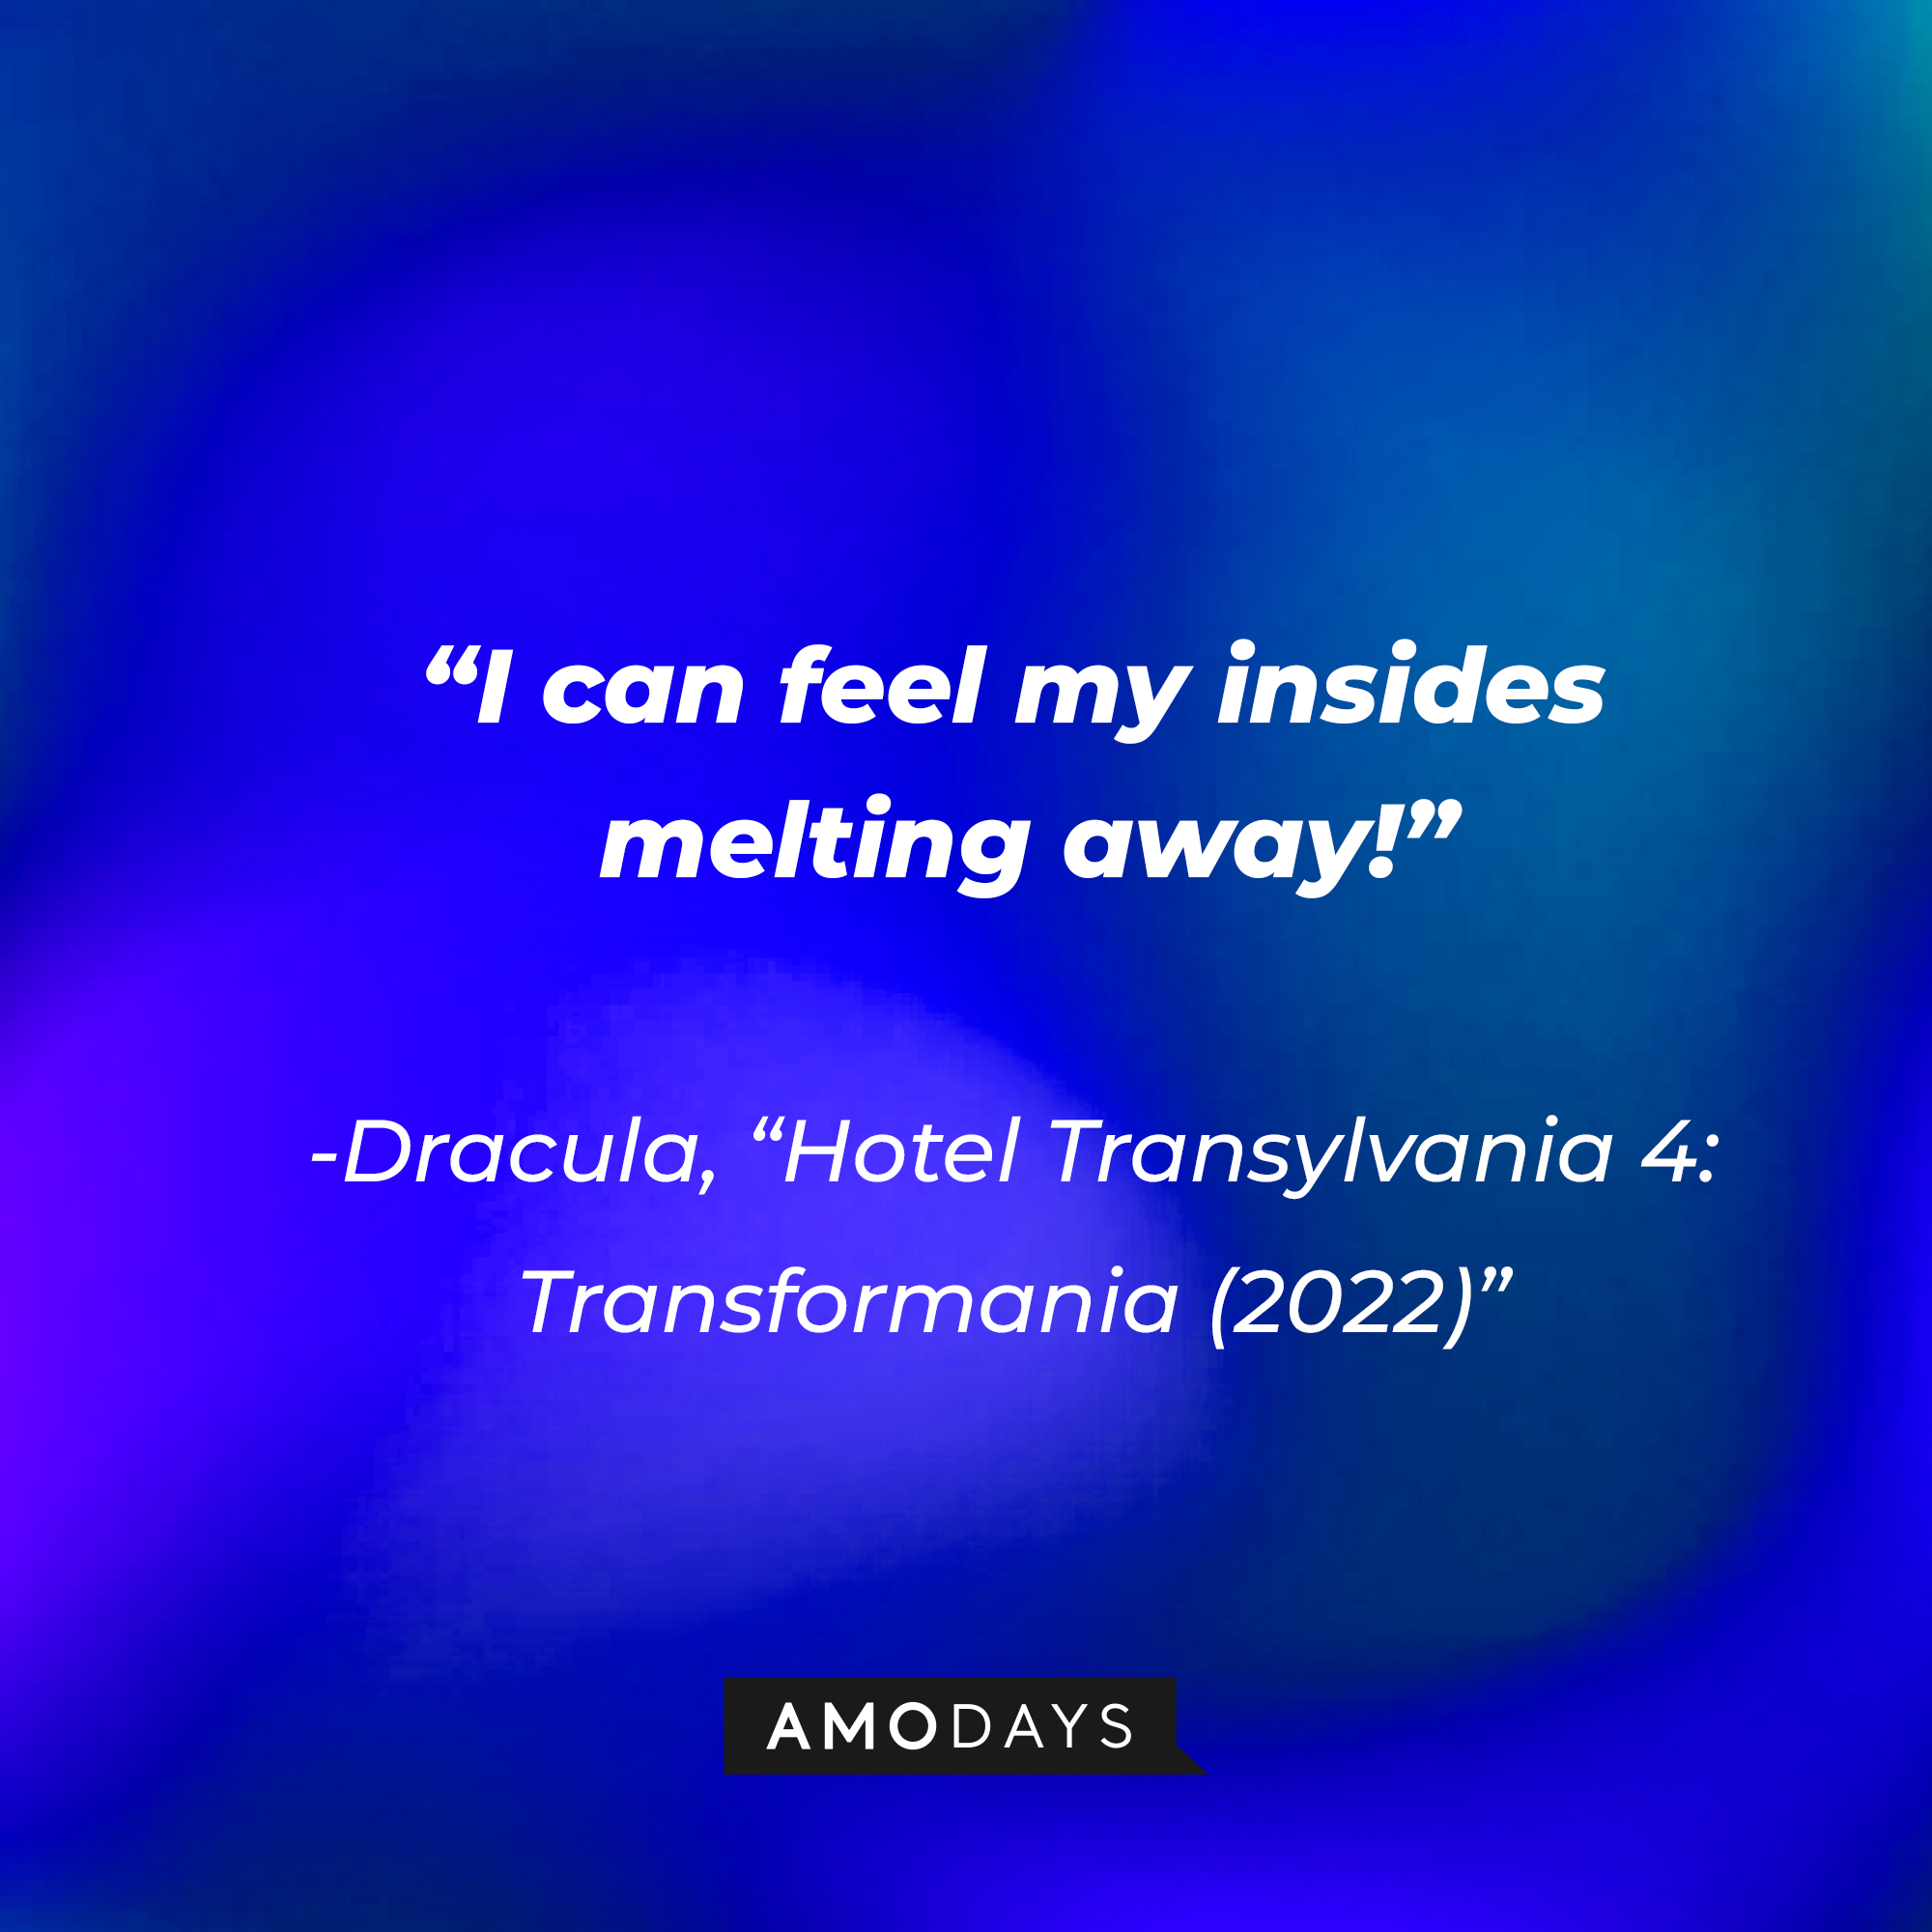 Dracula's quote: “I can feel my insides melting away!” | Source: Amodays